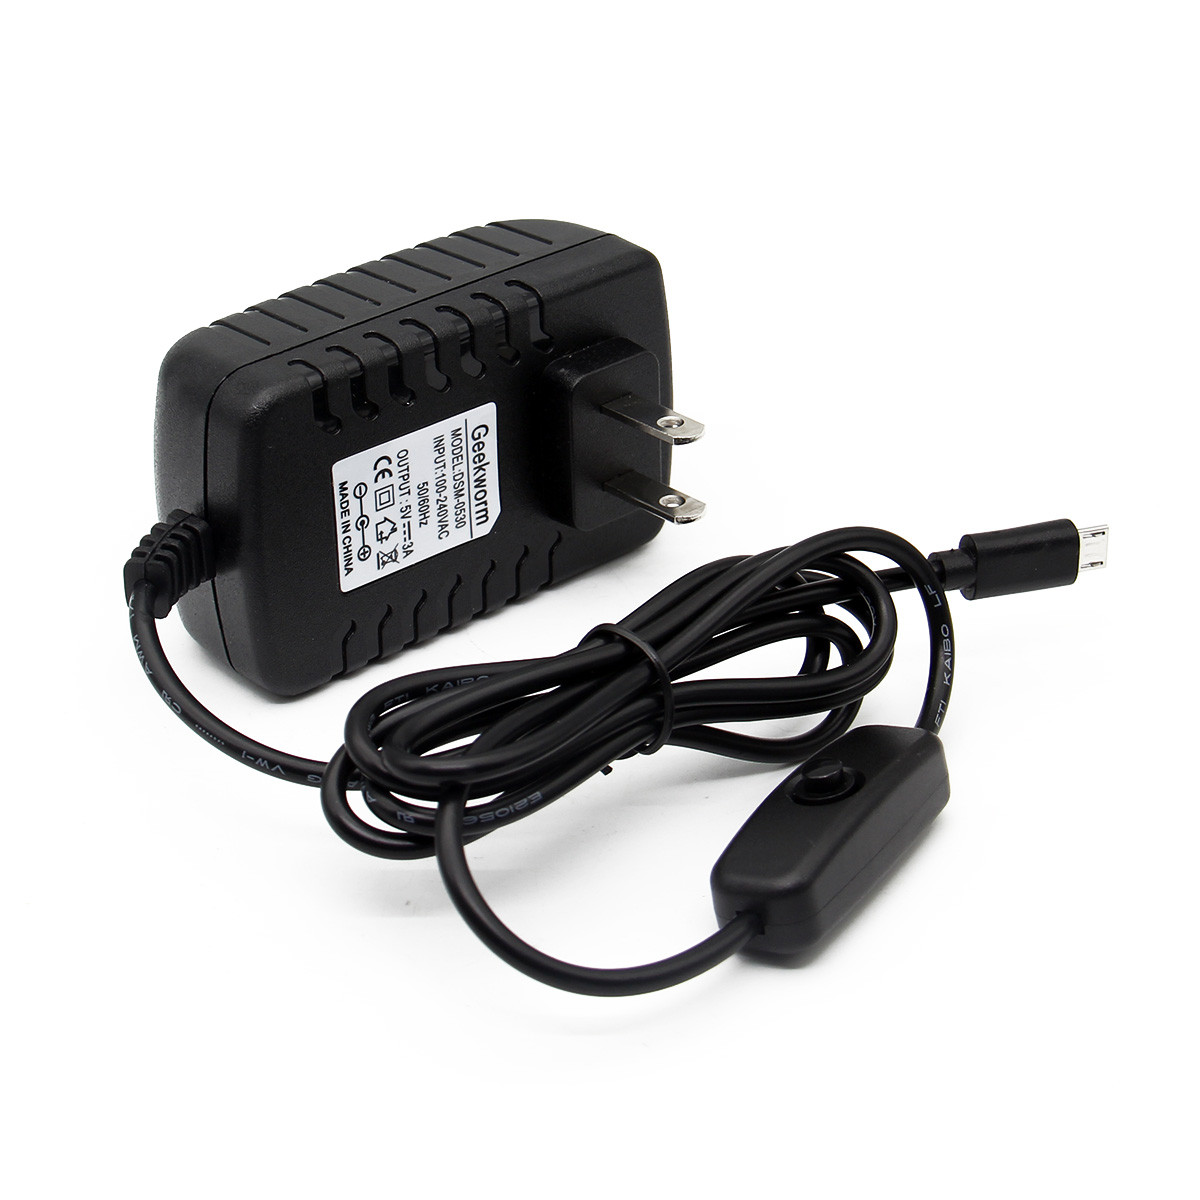 Geekworm US Standard DC 5V 3.0A Power Supply Adapter with Switch For Raspberry Pi 5